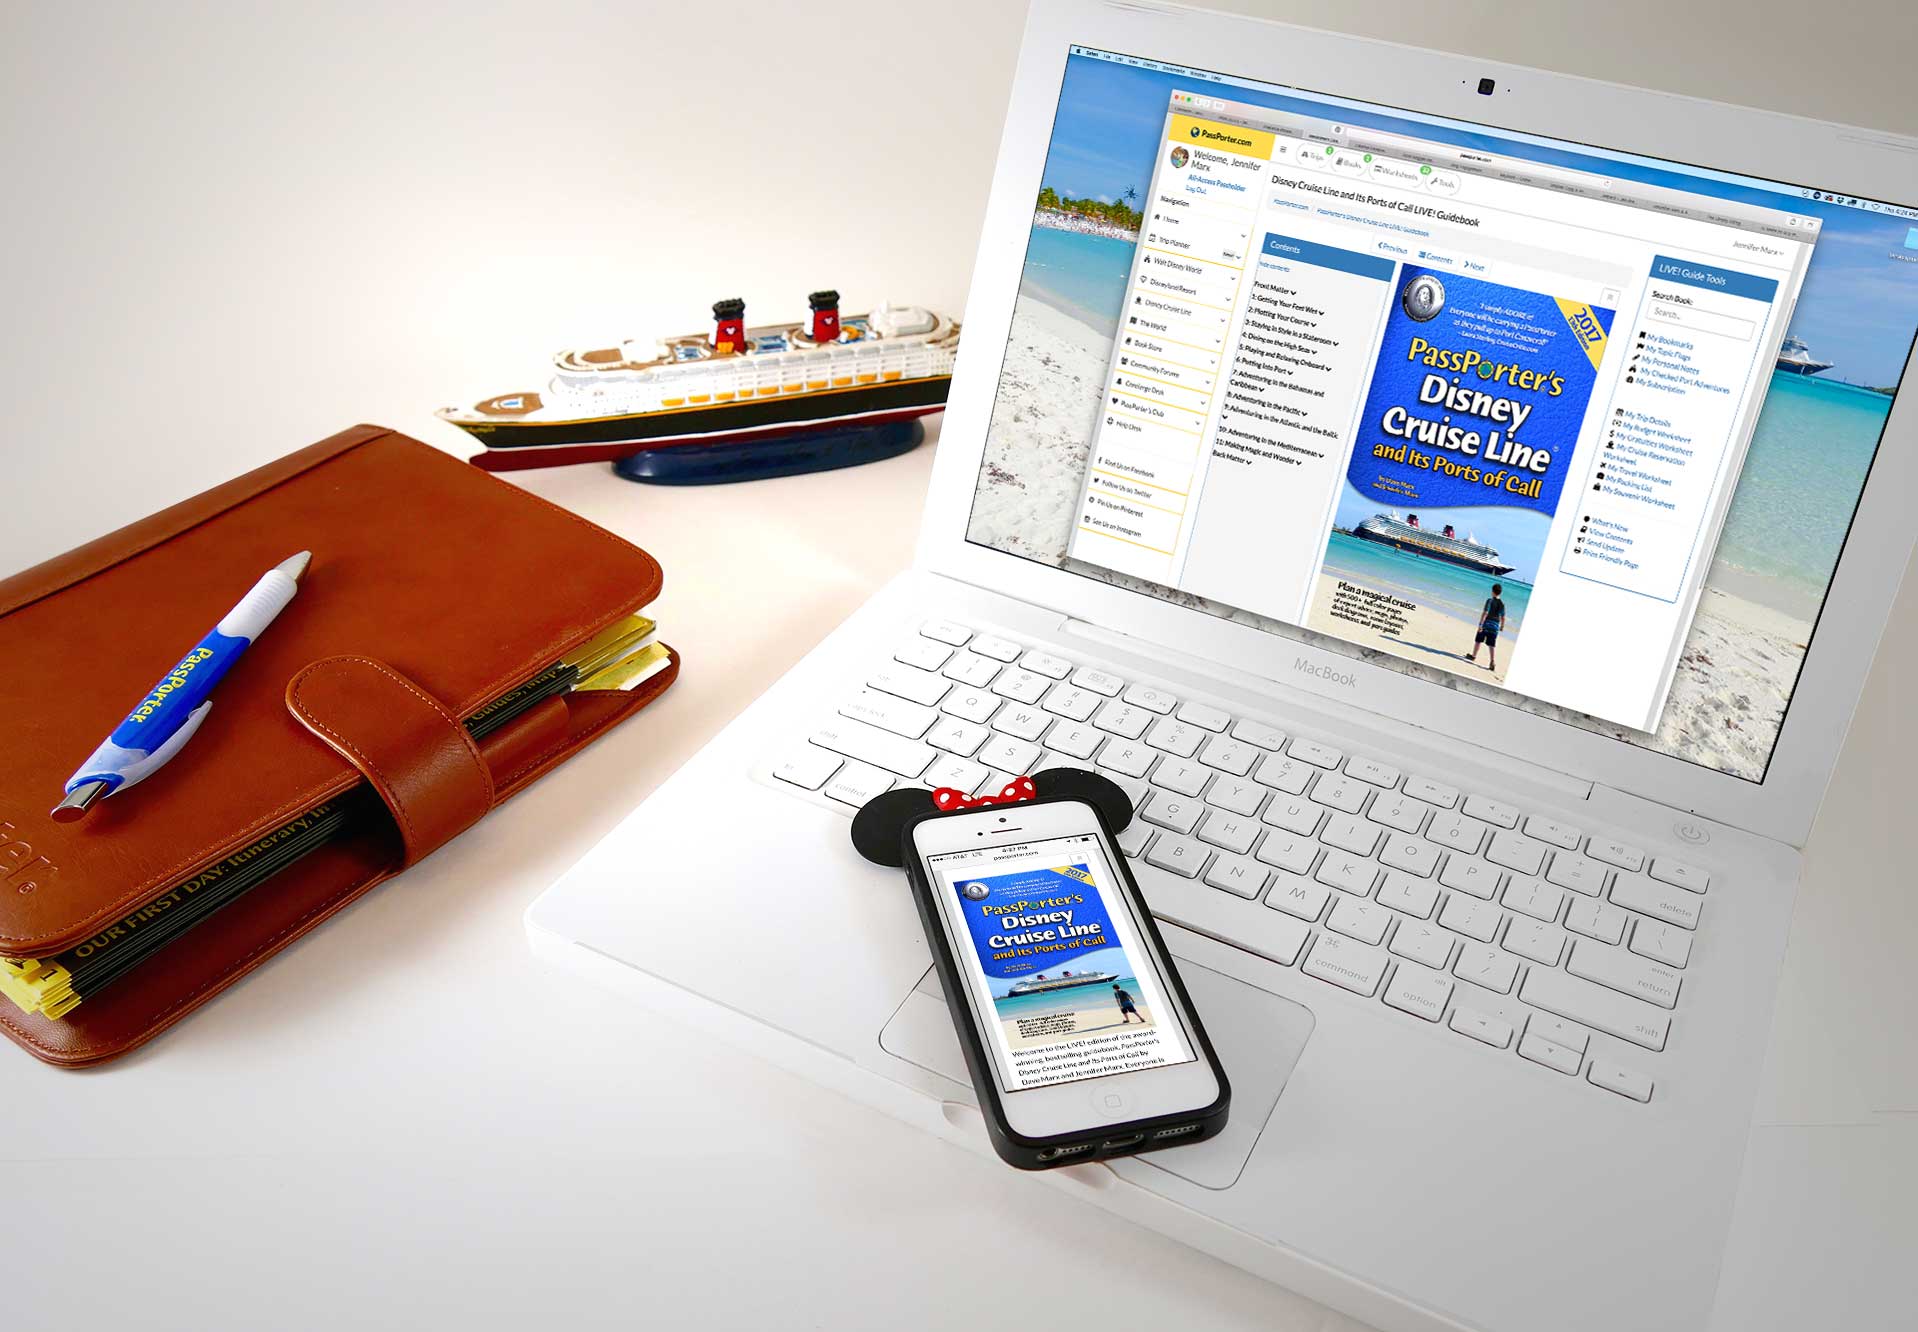 PassPorter Disney Cruise LIVE! Guide on Laptop and phone